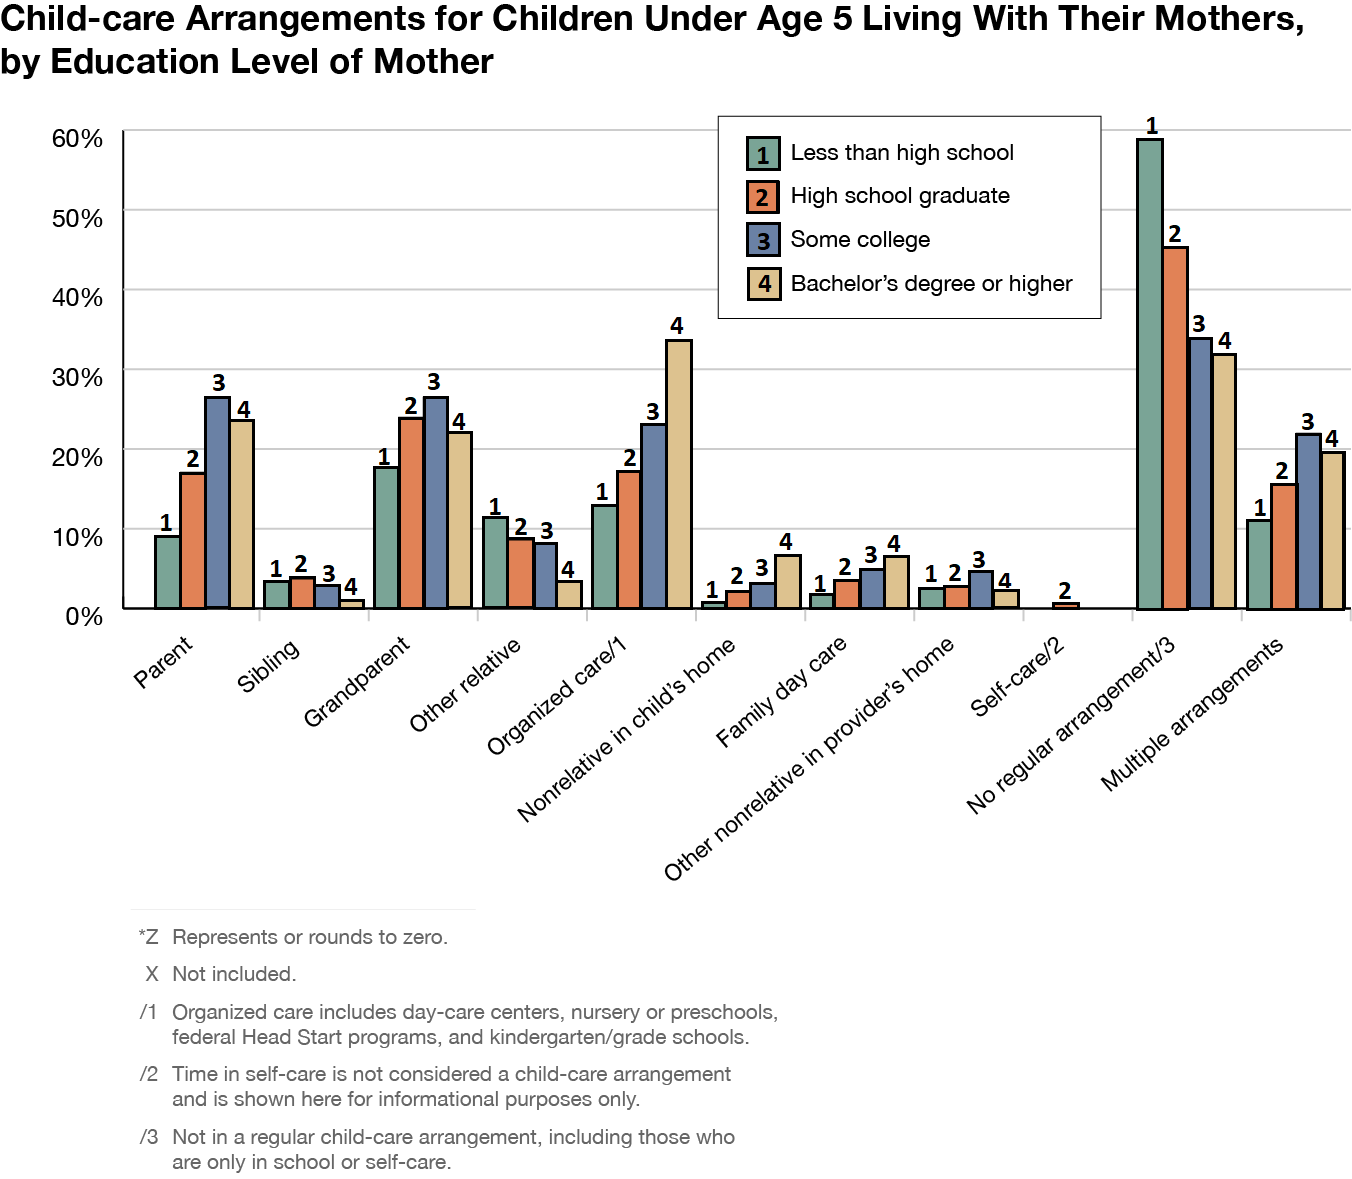 Child-care arrangements for children under age 5 living with their mothers, by education level of mother. To find the details on the graph please press Image description link below it.